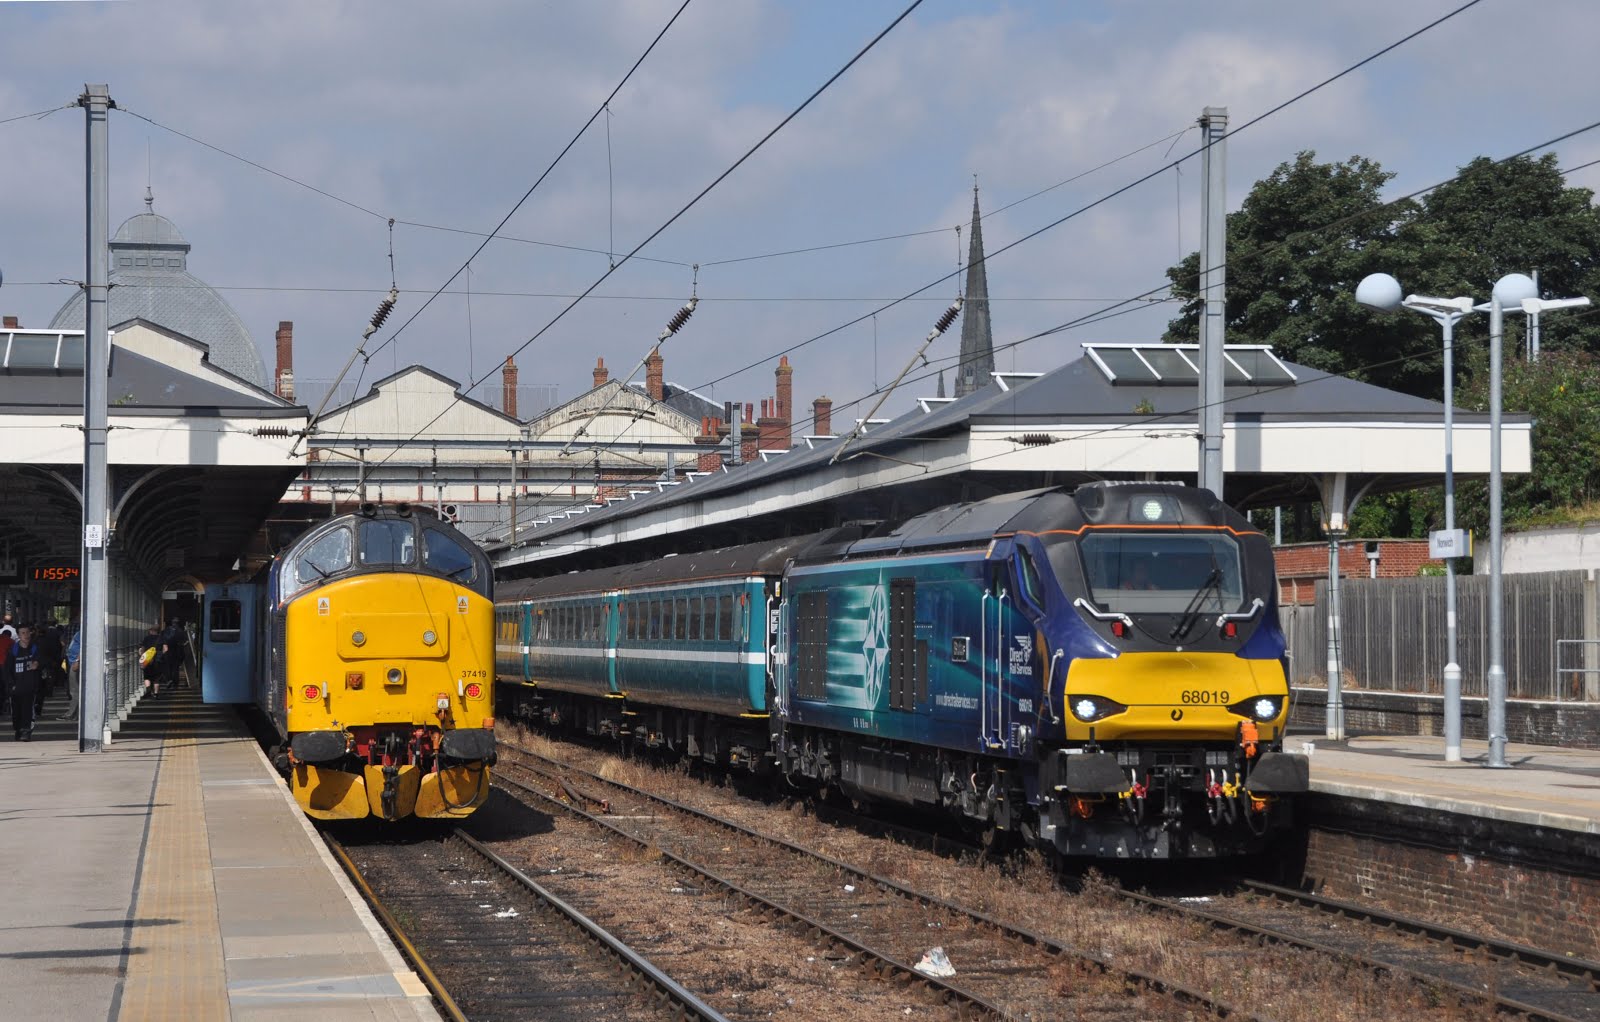 Trains Today: Now there are TWO short sets in Anglia!